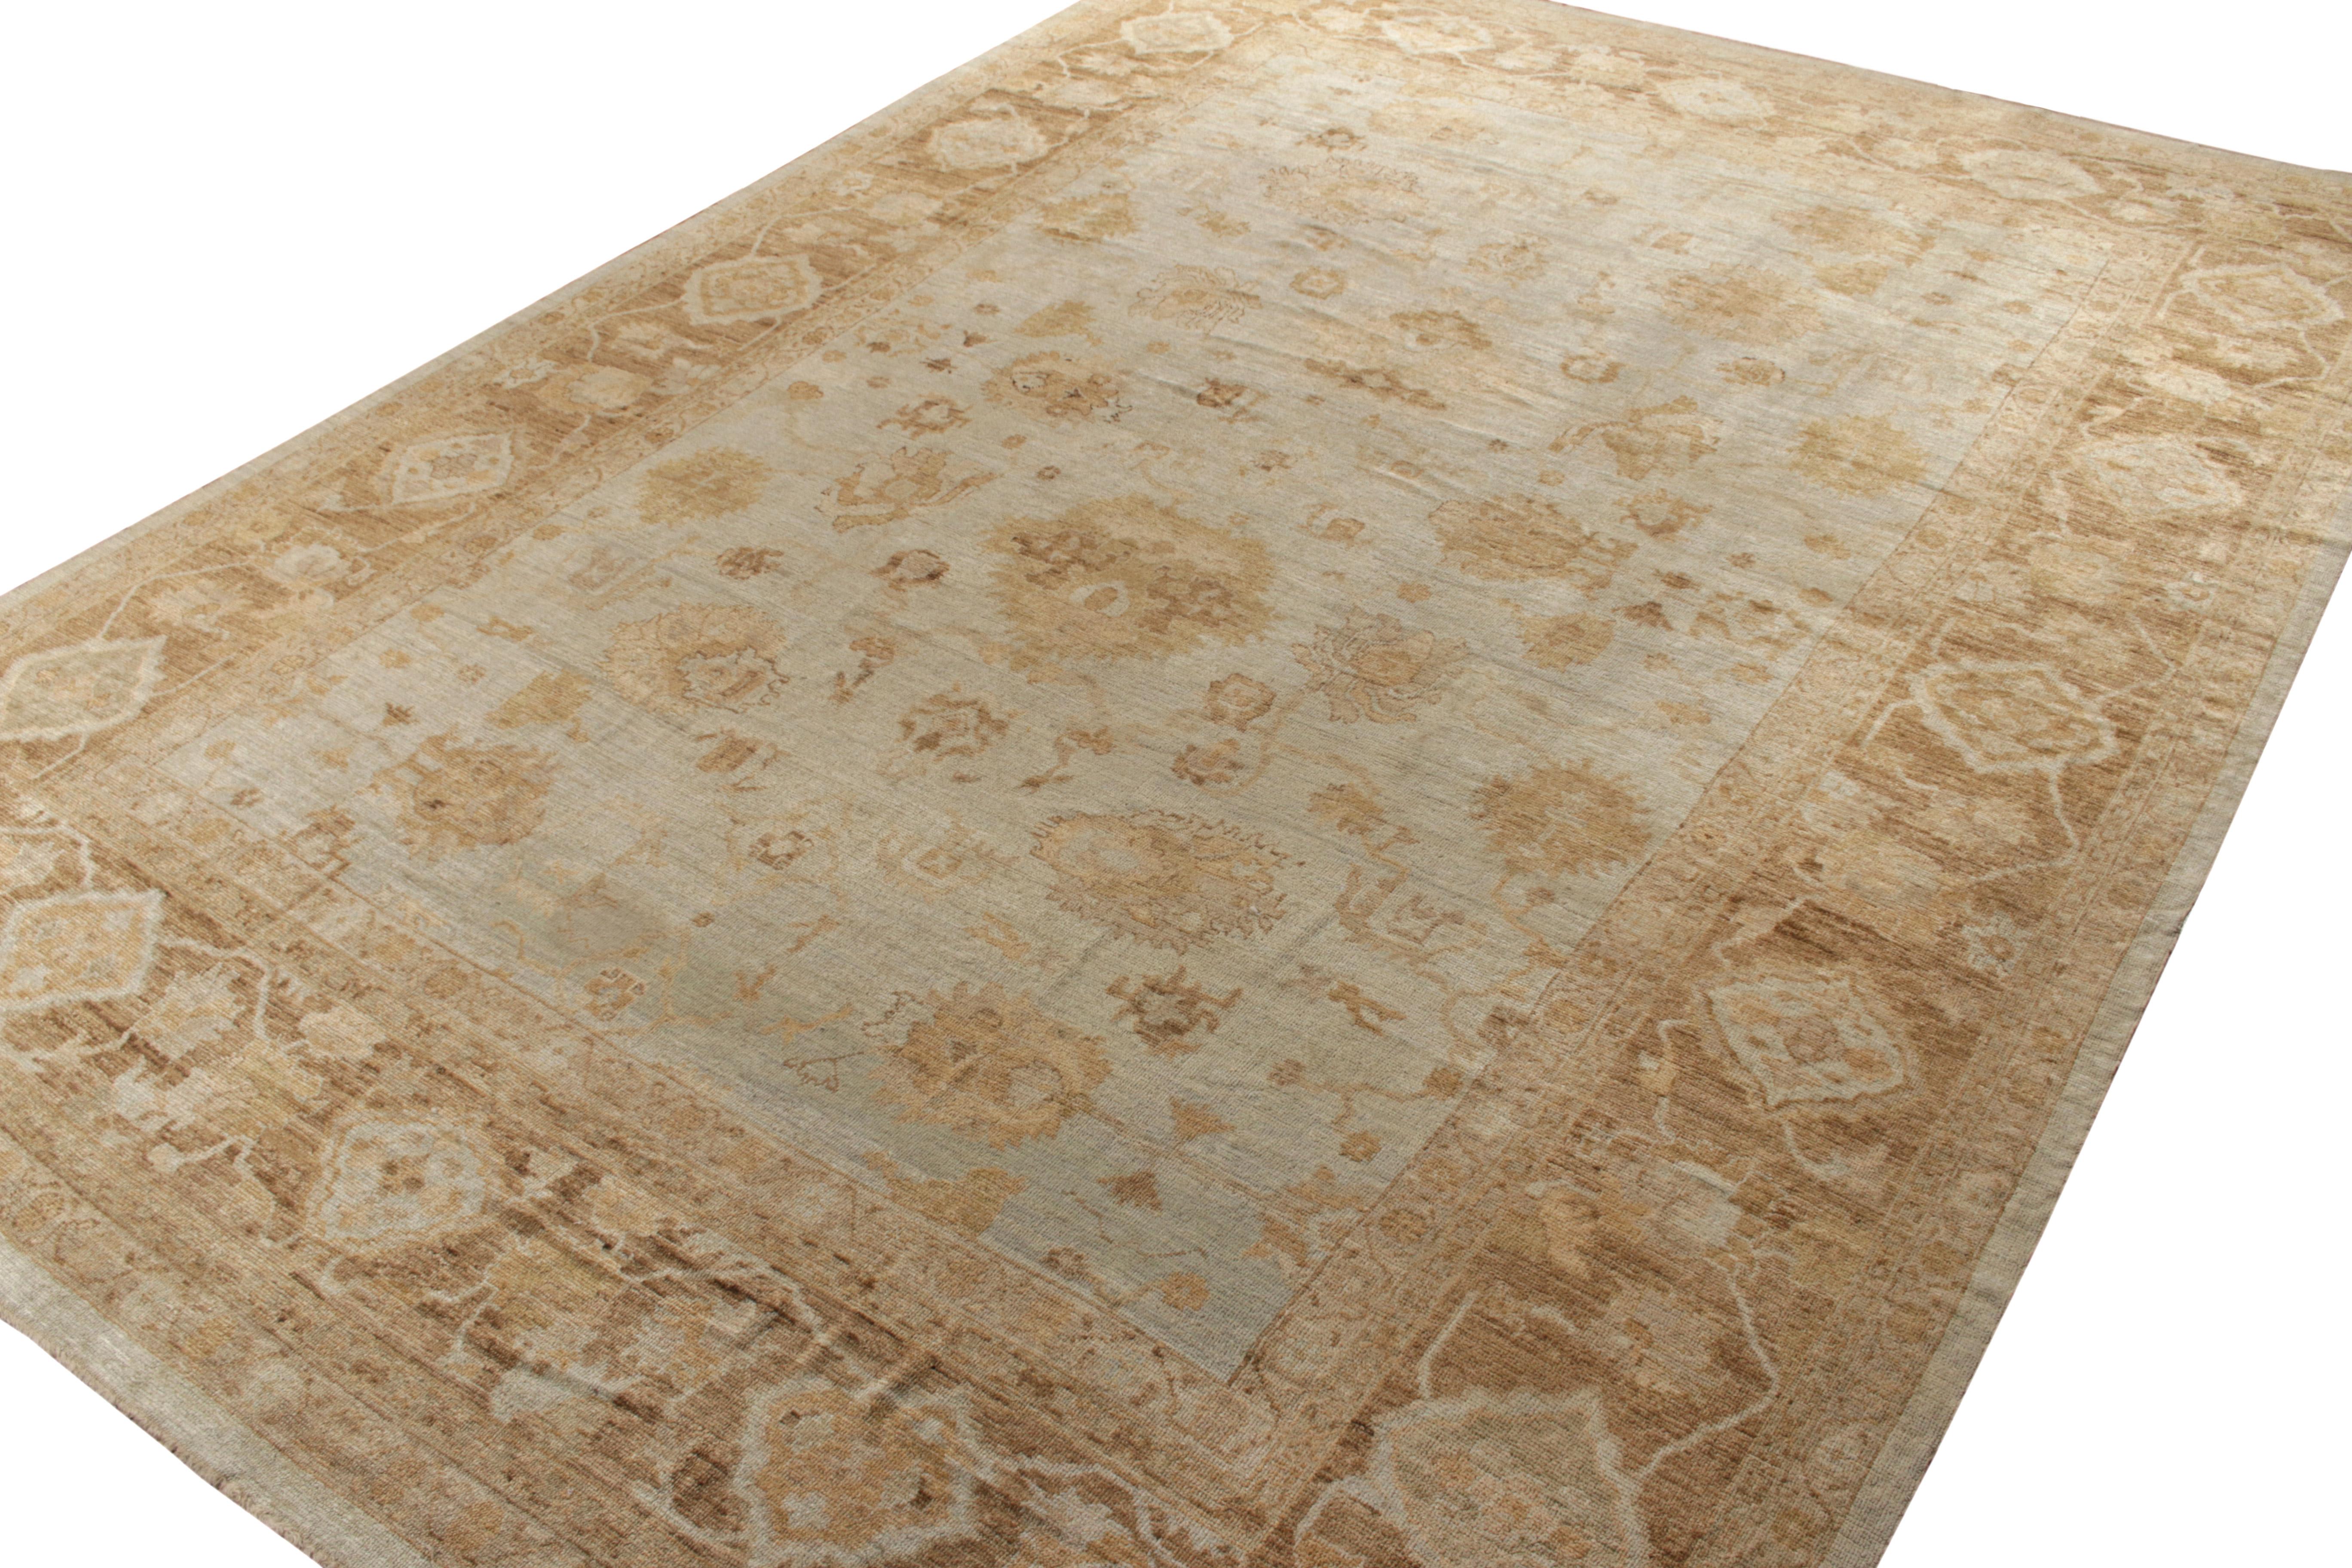 Turkish Rug & Kilim's Contemporary Oushak Rug in All over Blue, Beige Floral Pattern For Sale